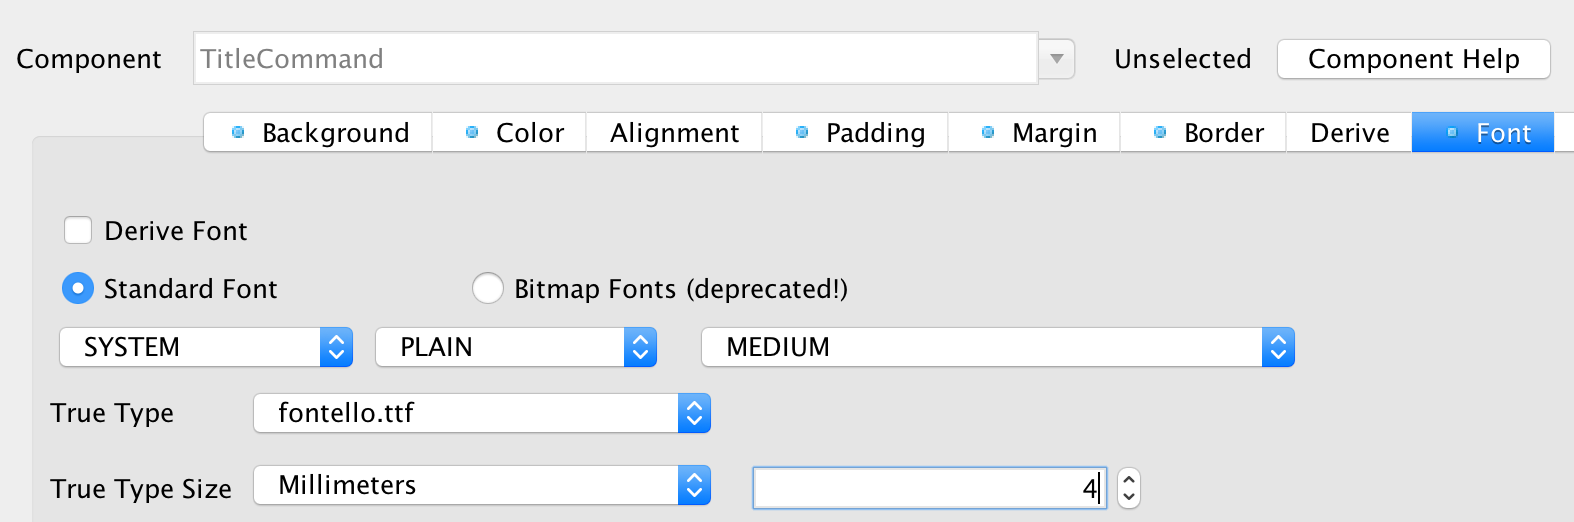 Using styles for icon fonts is the best way to define icon fonts